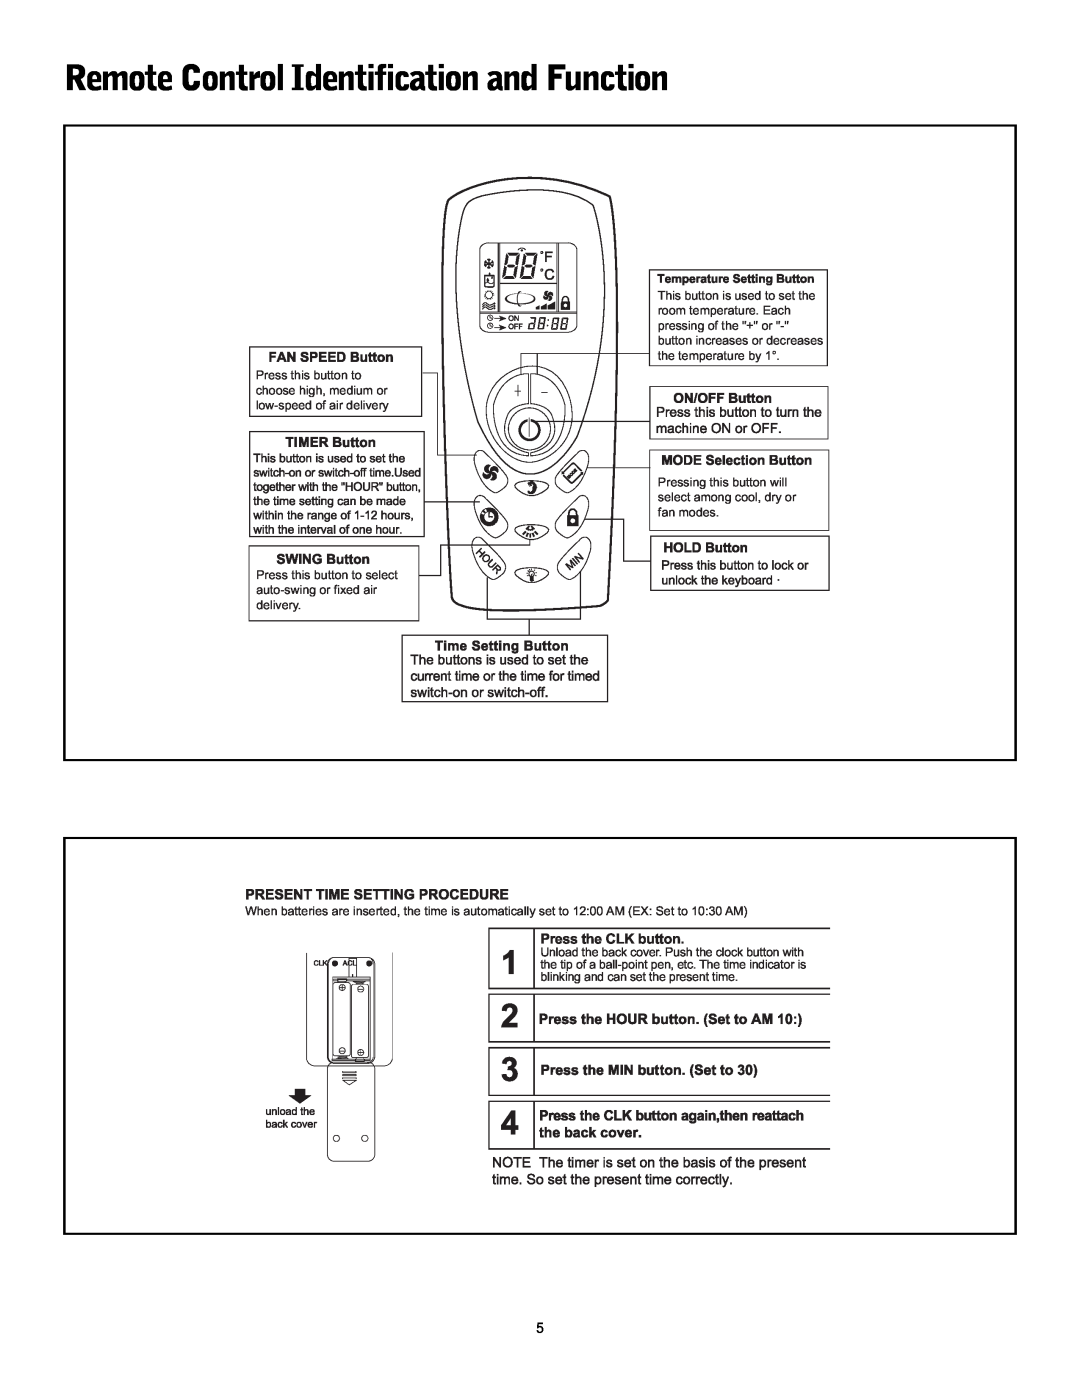 Friedrich P-12 operation manual Remote Control Identification and Function, Press the CLK button 